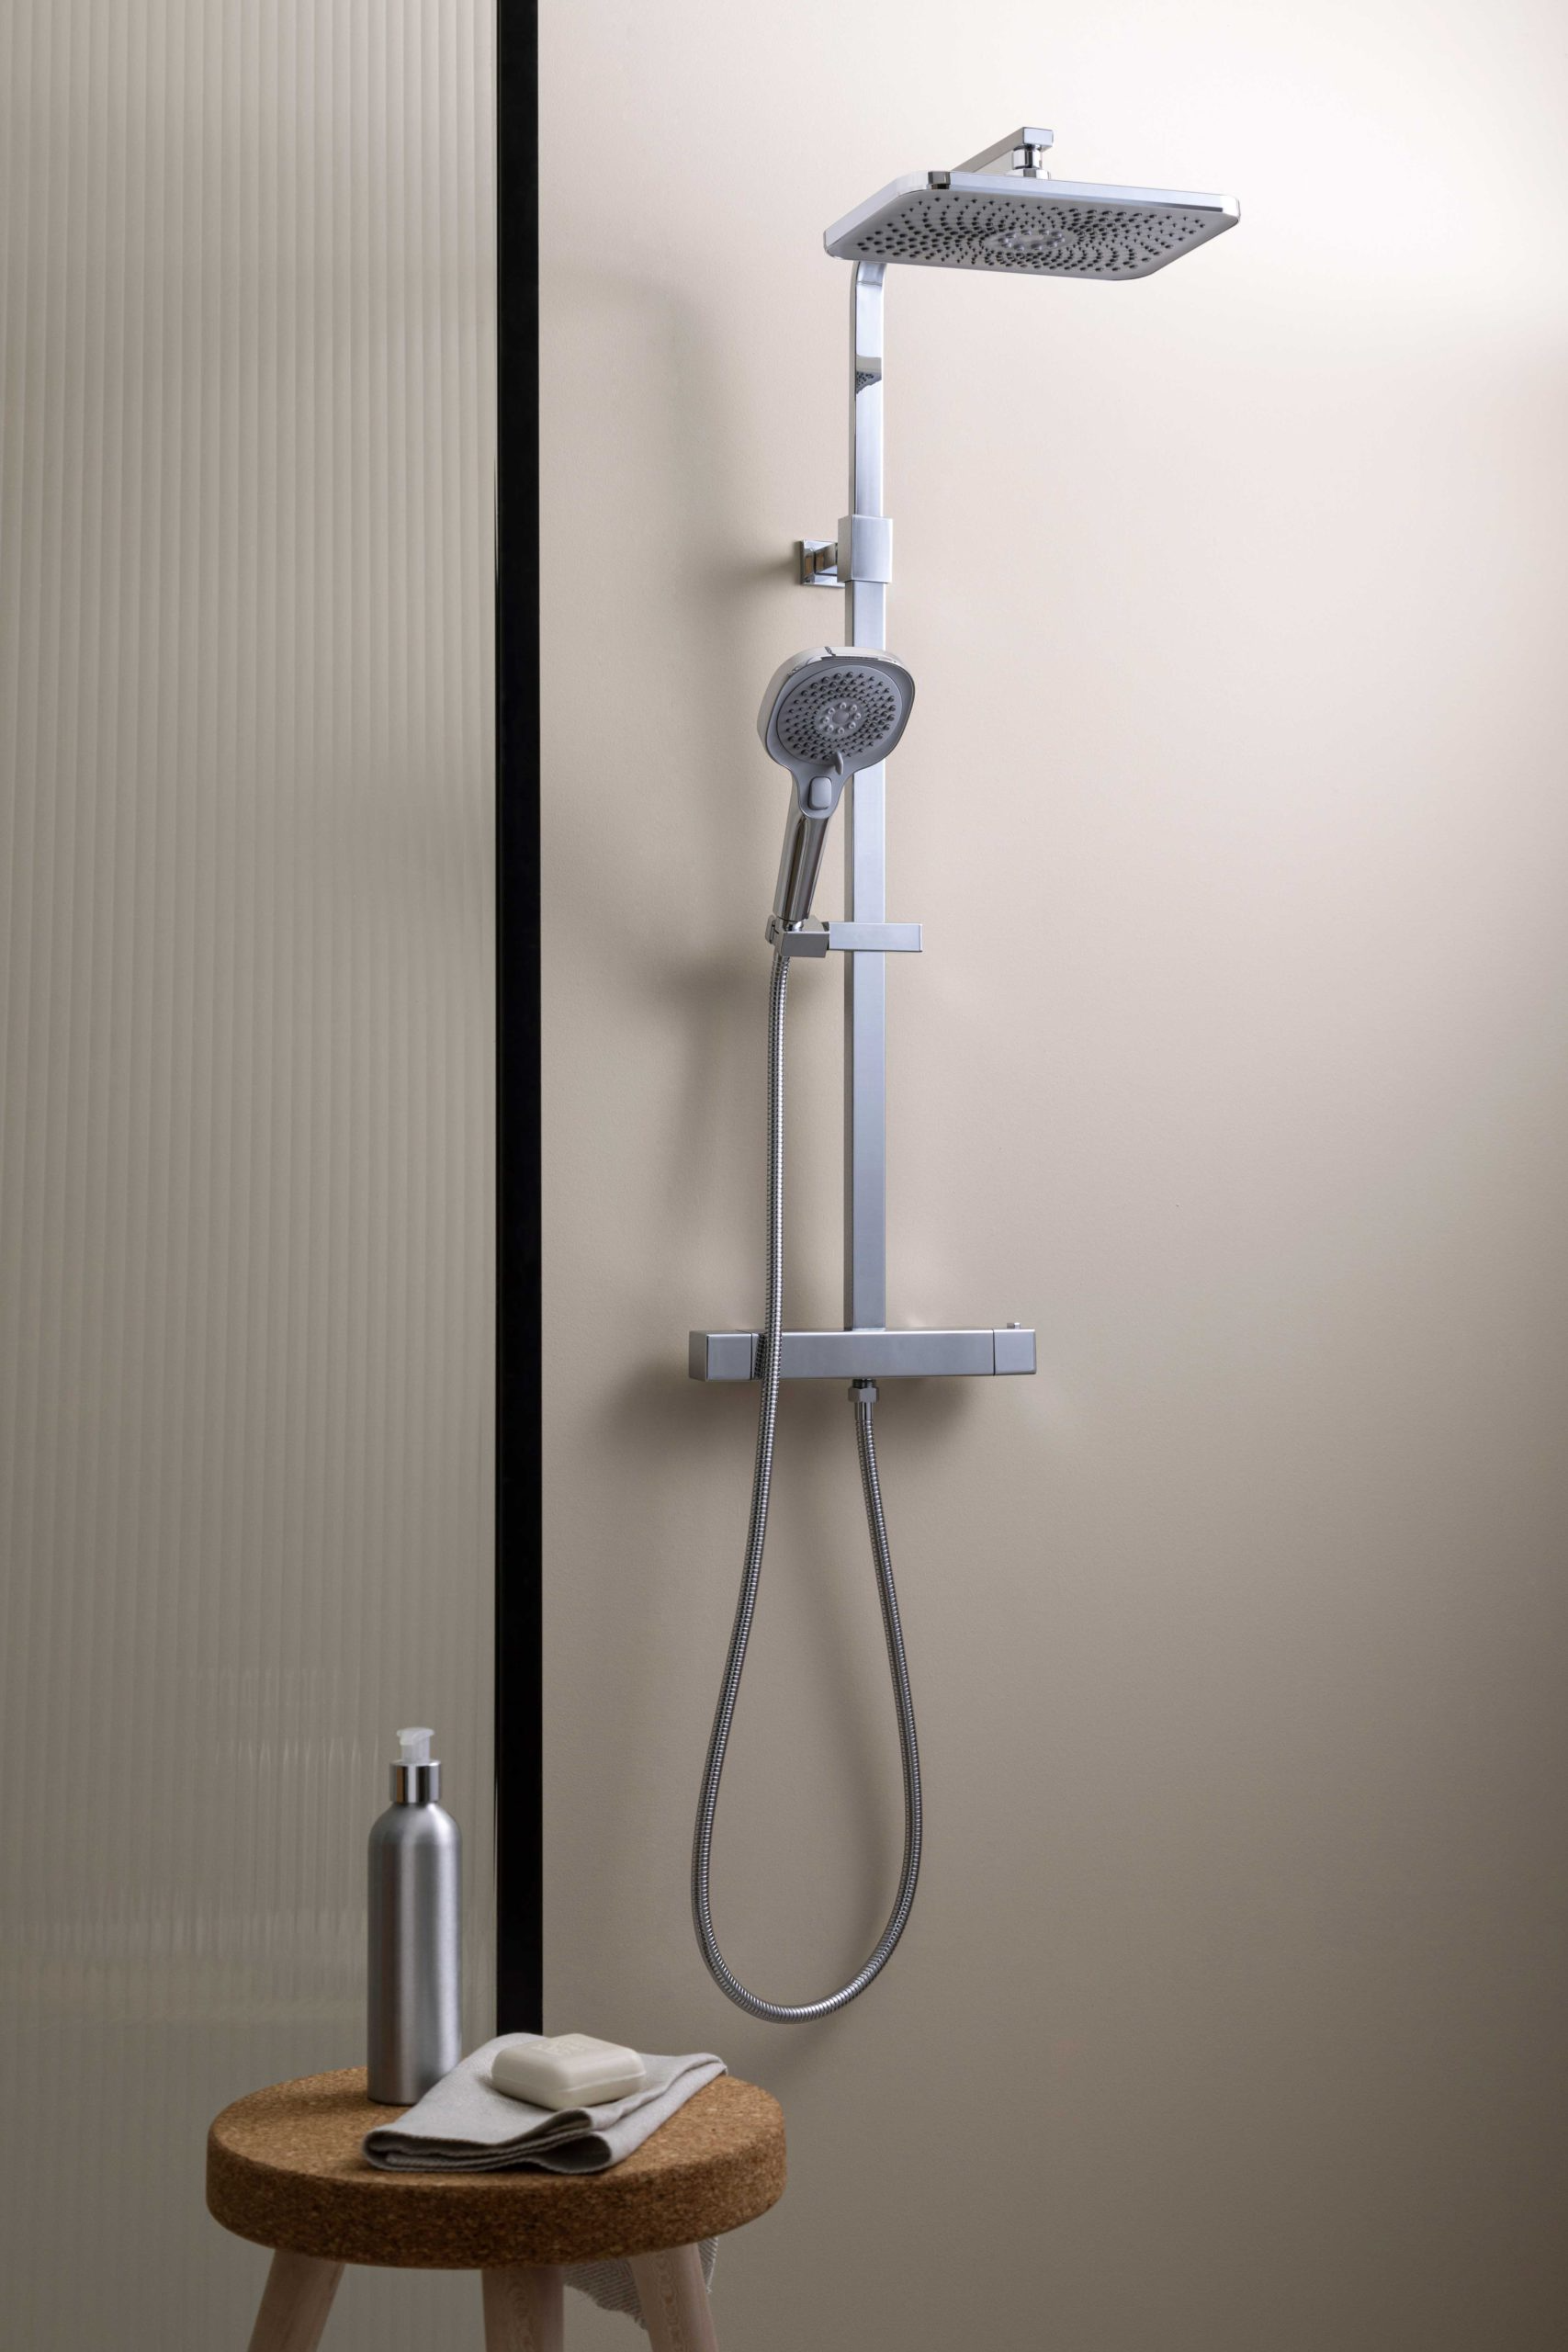 thermostatic_bar_valve_with_2_outlets_multifunctional_shower_handle_chrome